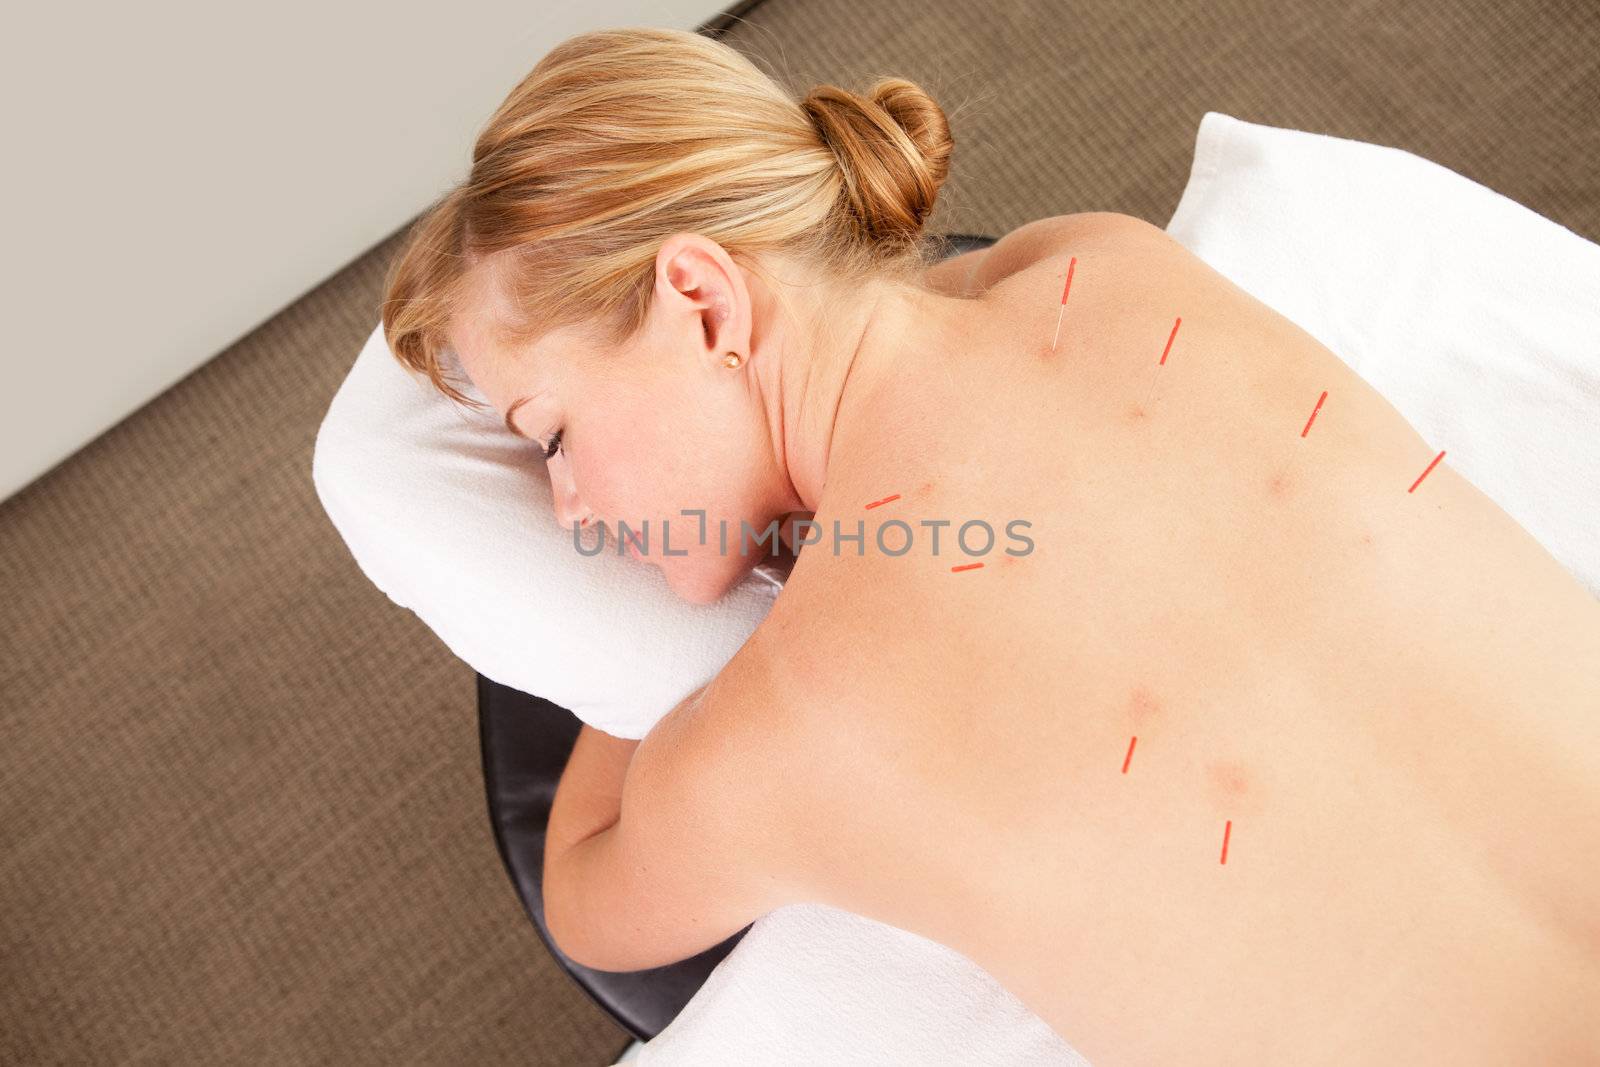 Acupuncture patient with needles along Back Shu points, showing good signs of redness